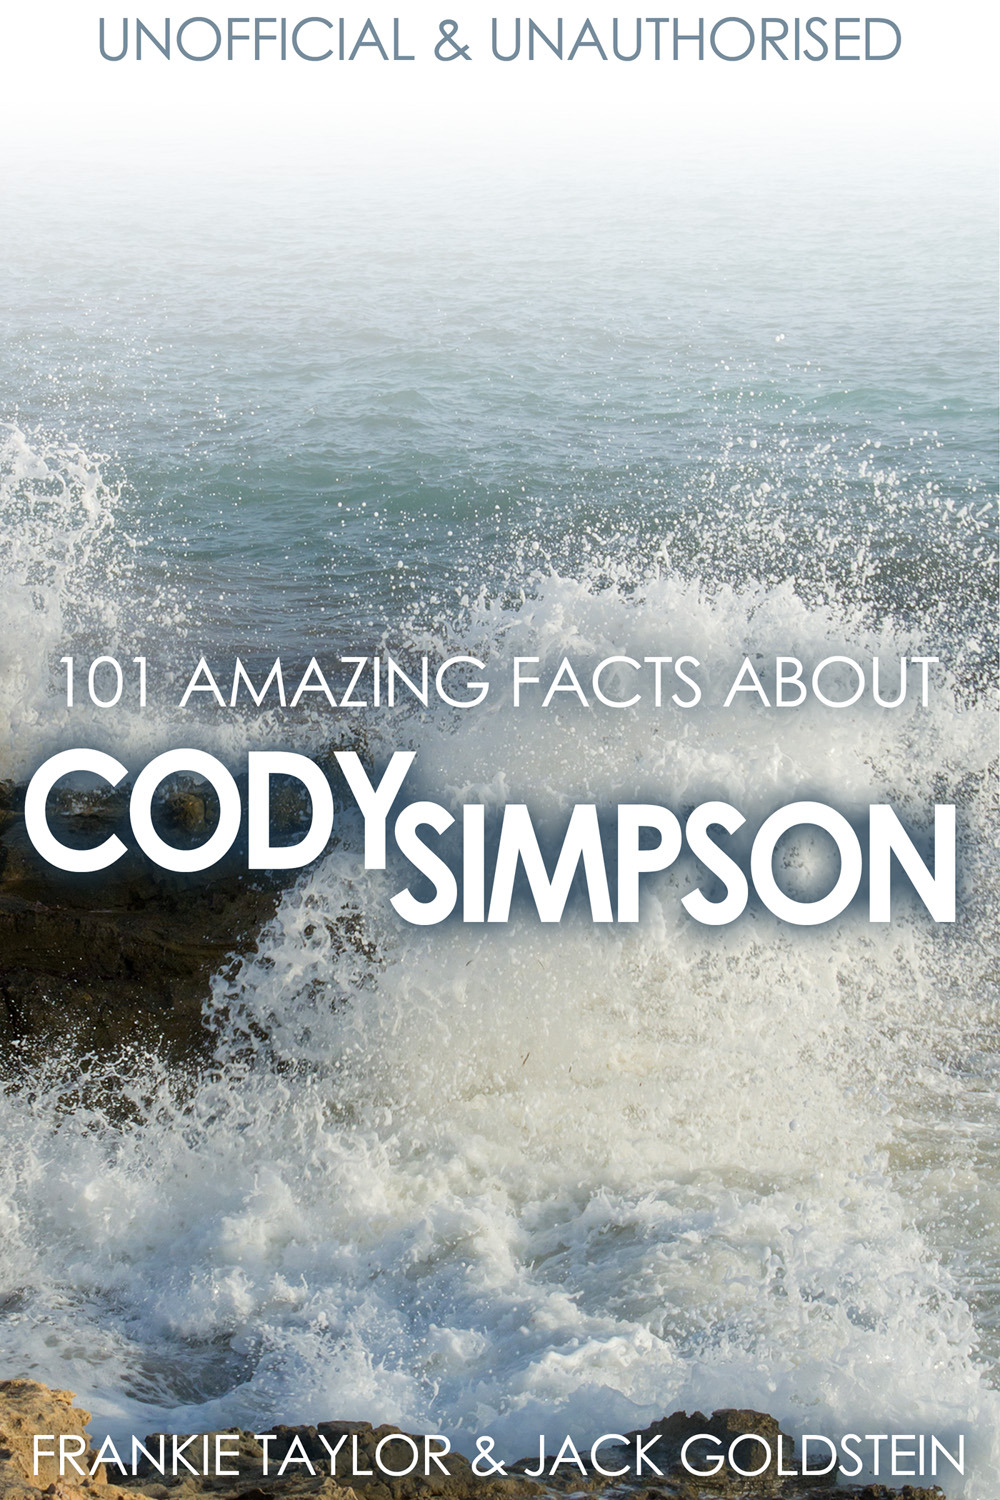 Goldstein, Jack - 101 Amazing Facts about Cody Simpson, ebook